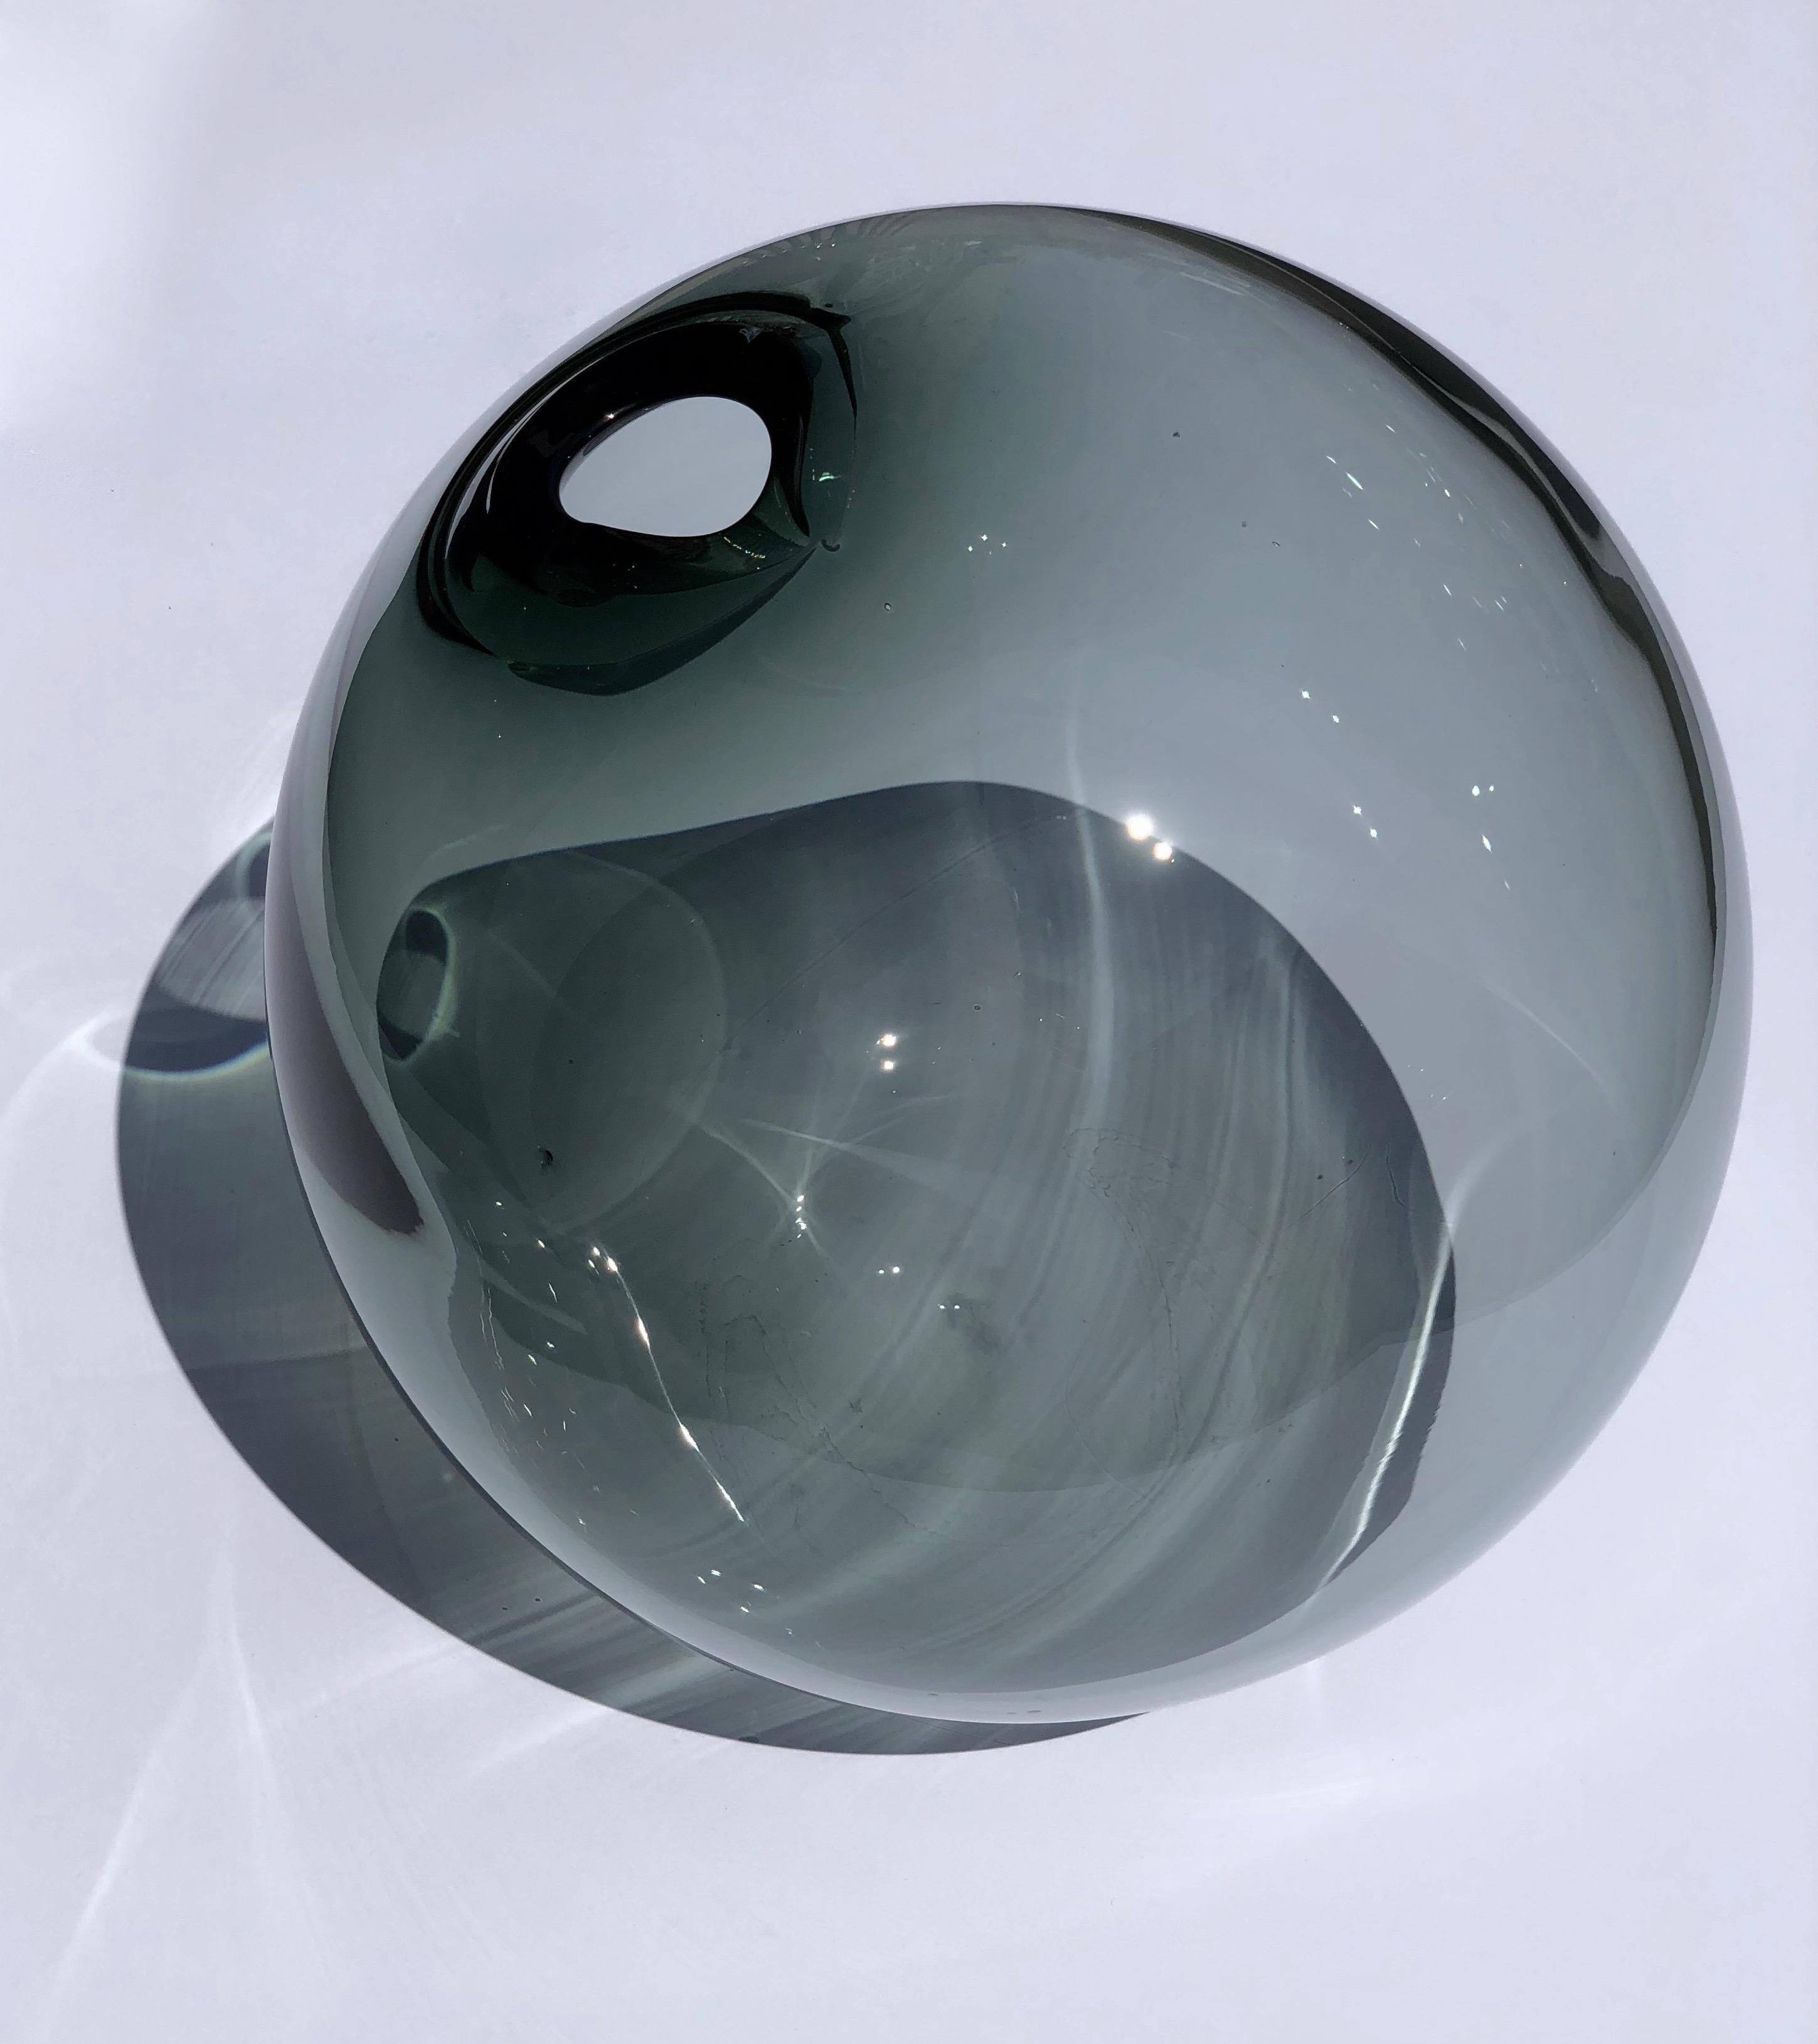 A beautiful, round glass vase, that has been hand blown into an organic form. Smoky grey in color and 30 mm
in diameter. The size and transparent color give it a feeling of a bubble. The effect is heightened by placing the object in sun